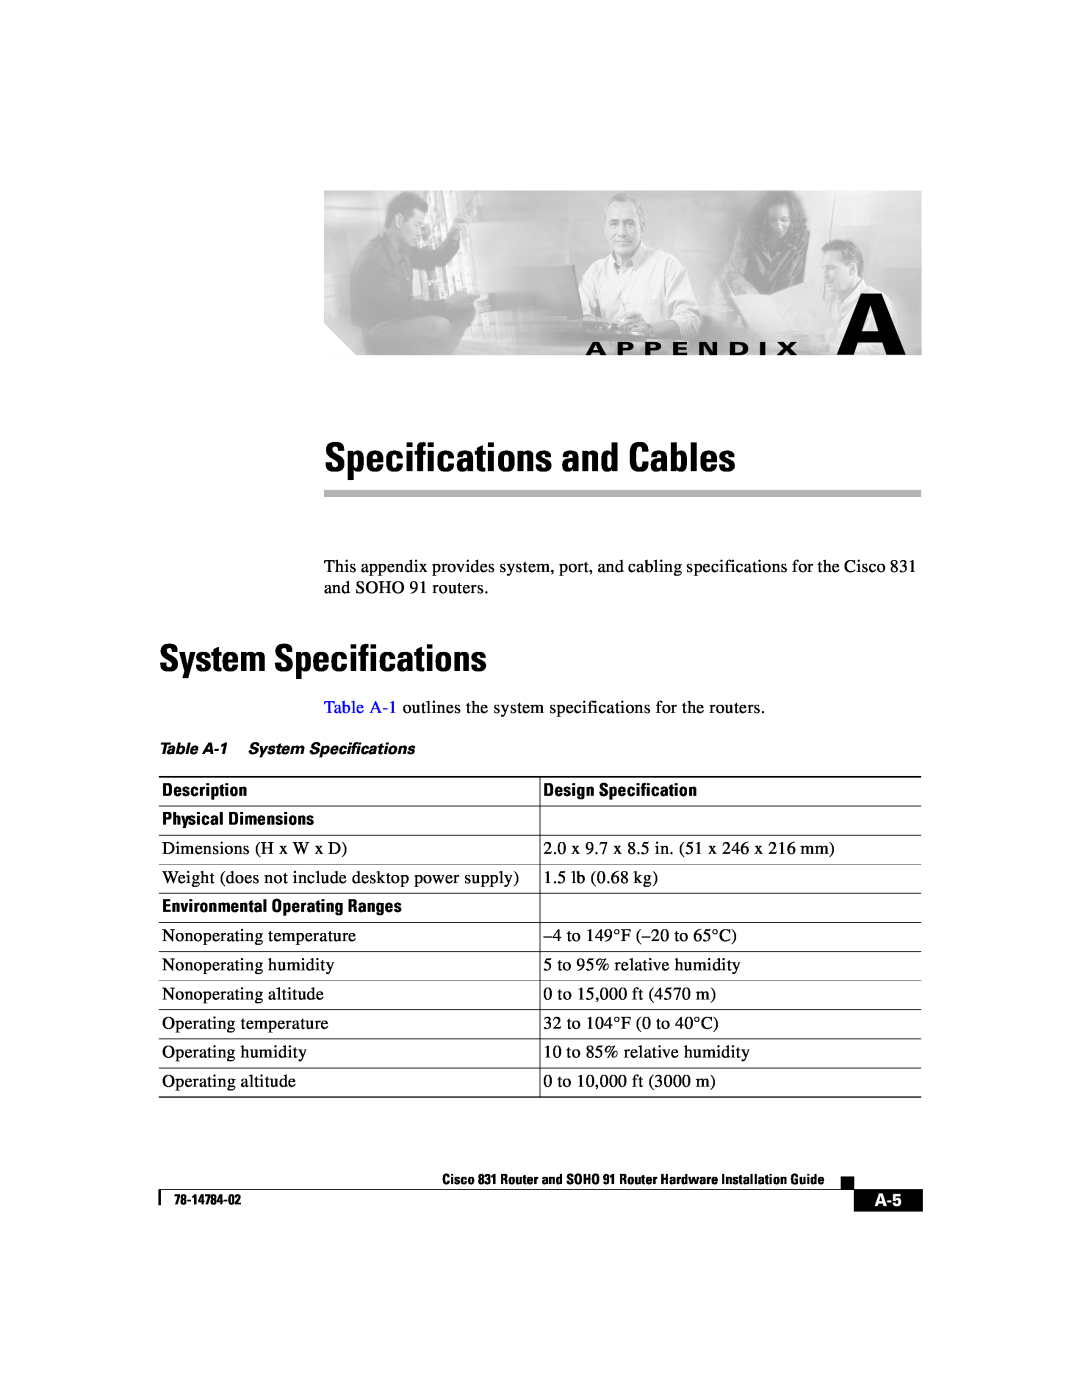 Cisco Systems 78-14784-02 manual Specifications and Cables, System Specifications, A P P E N D I X A 